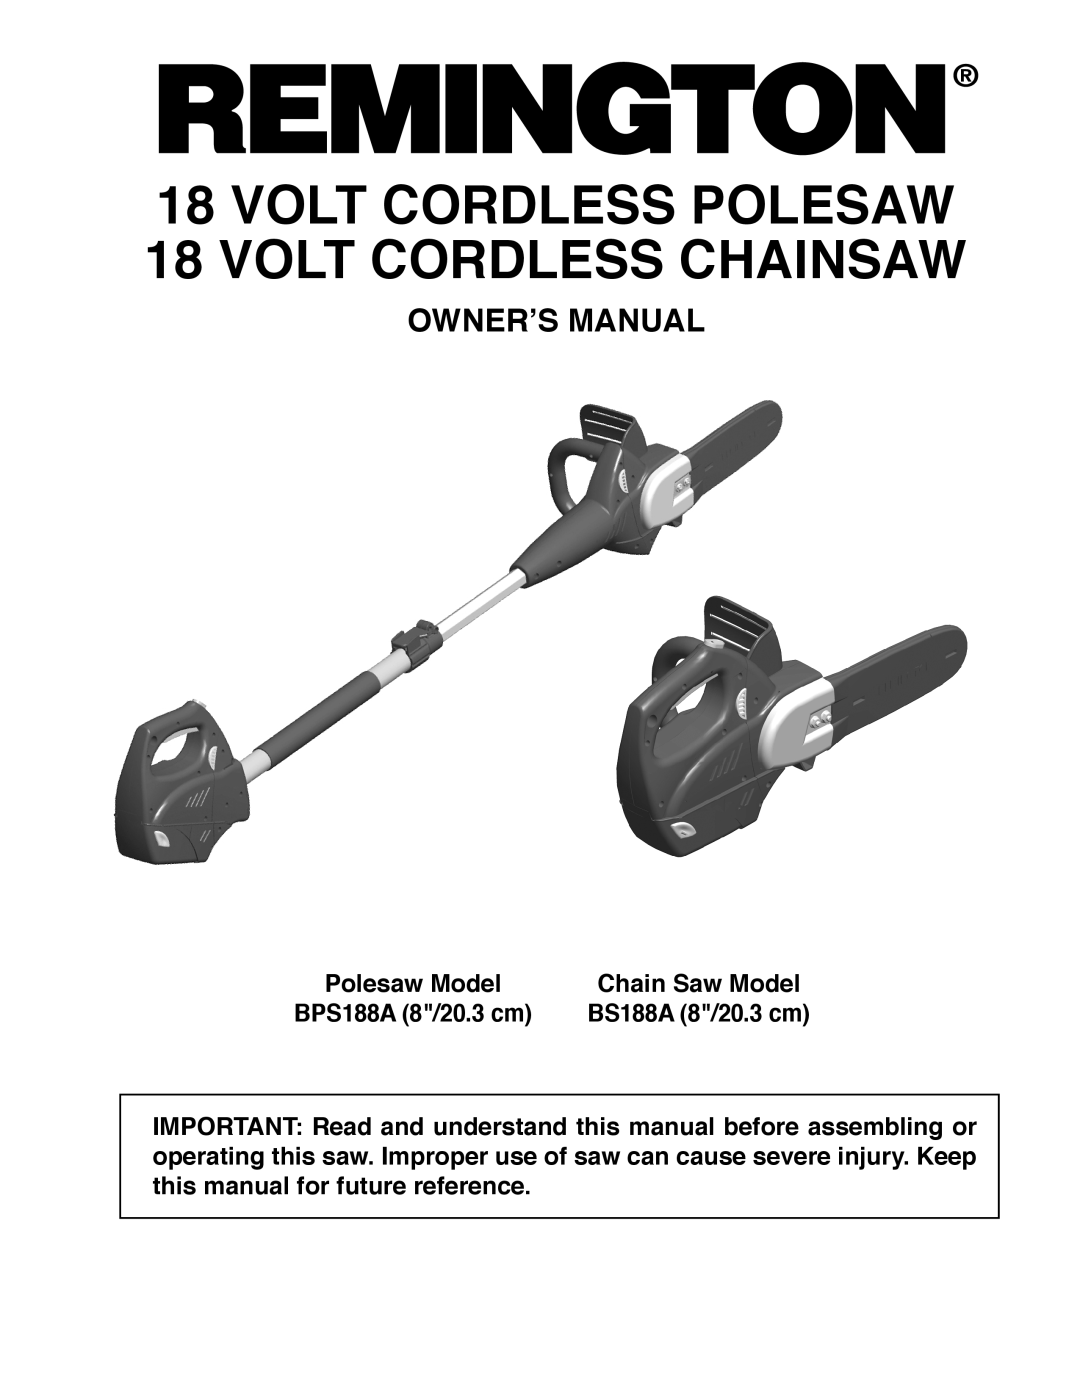 Remington BS188A, BPS188A owner manual Owner’S Manual, VOLT CORDLESS POLESAW 18 VOLT CORDLESS CHAINSAW, Polesaw Model 